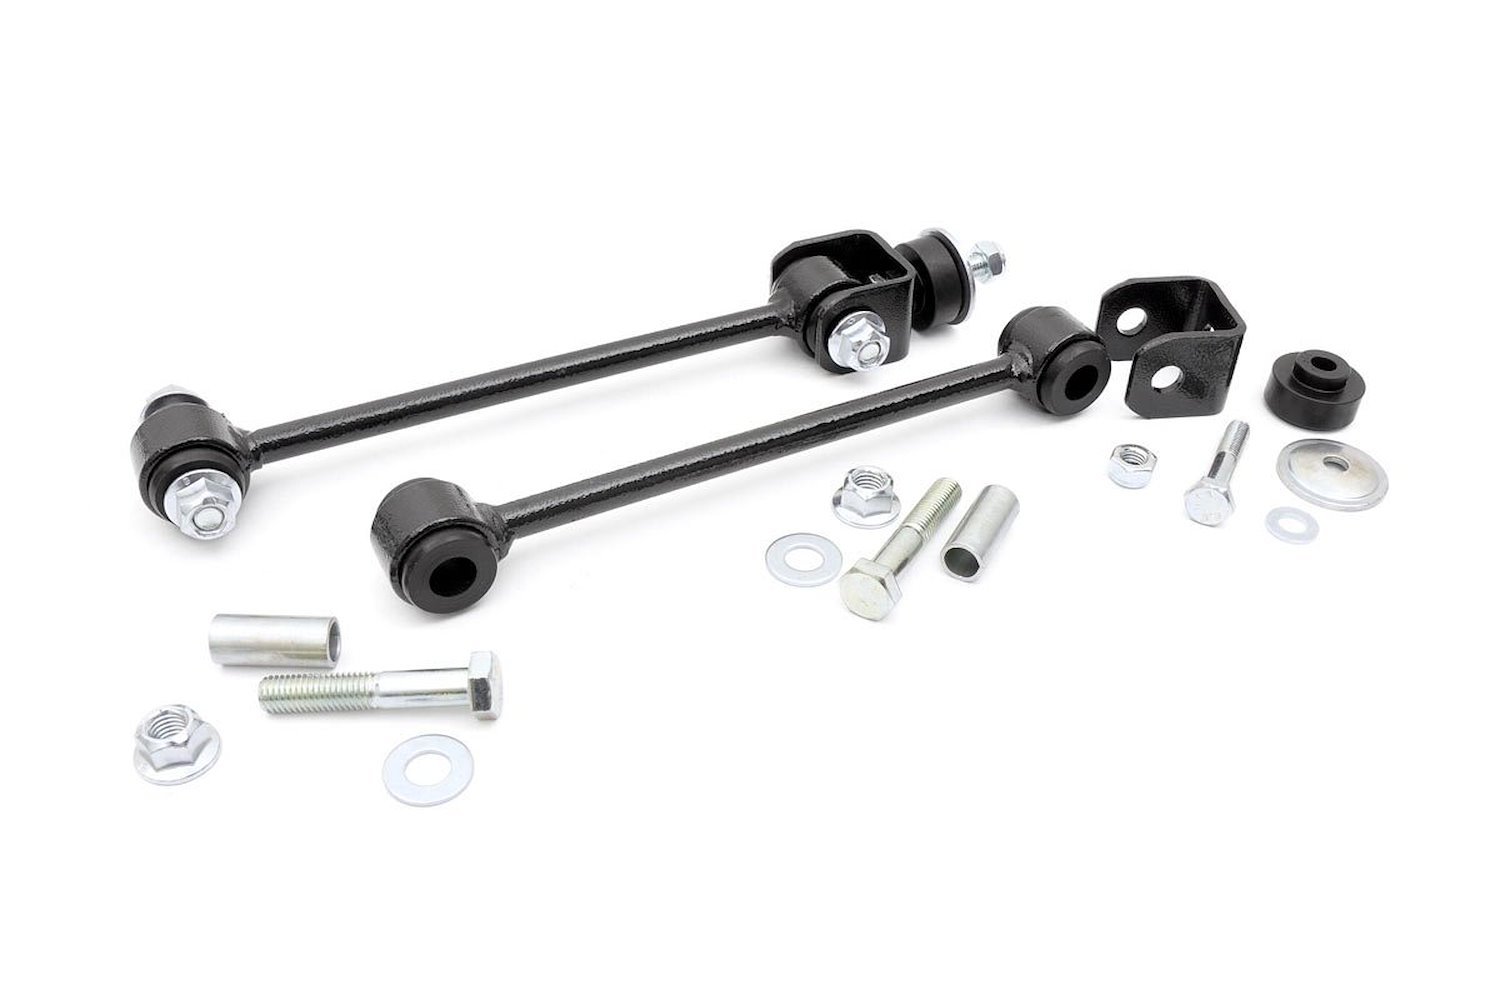 1023 Rear Sway Bar Links for 4-inch Lifts